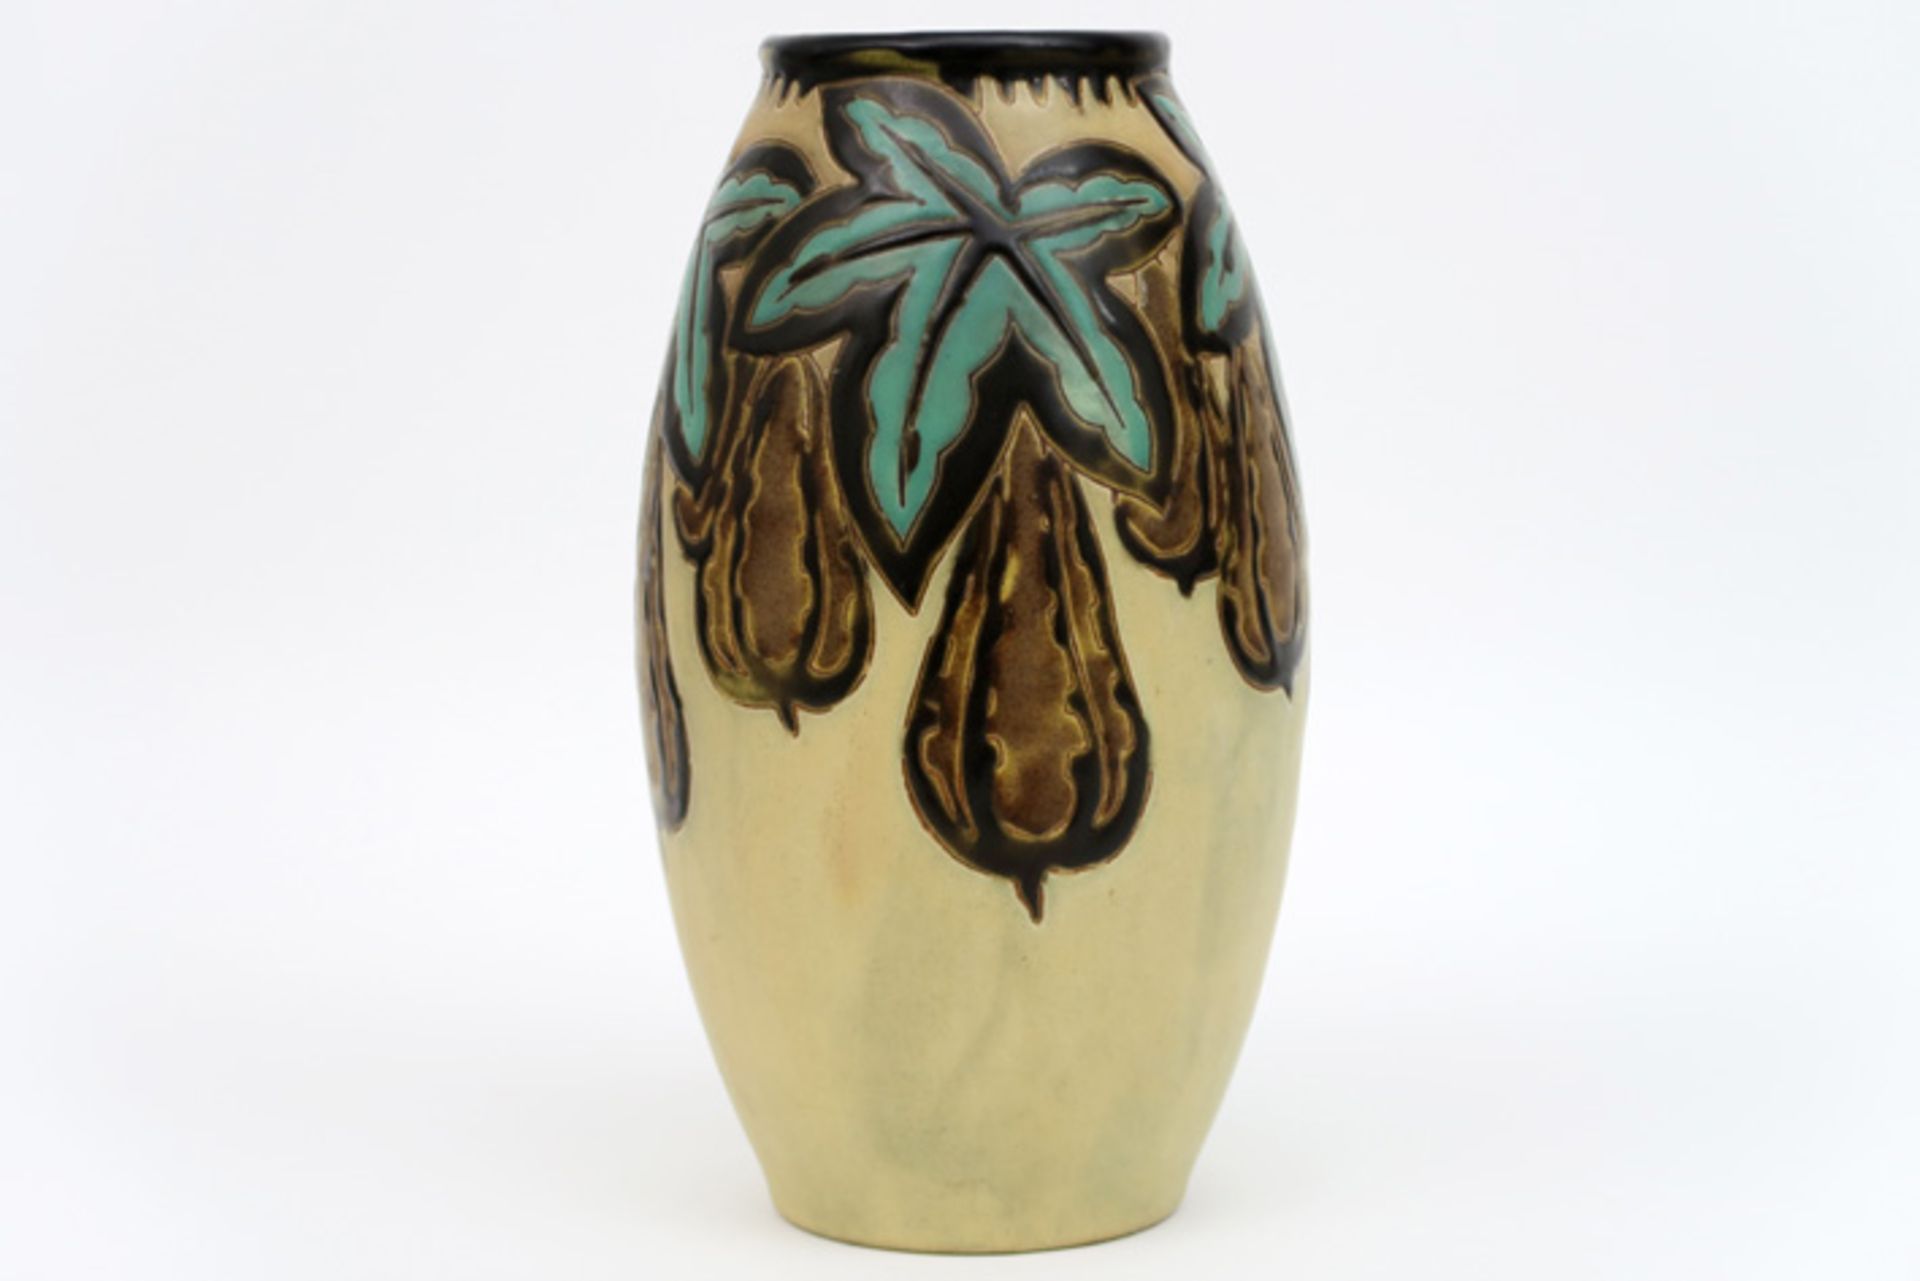 Belgian Art Deco vase in "Keramis" marked earthenware with a polychrome decor with fruits and